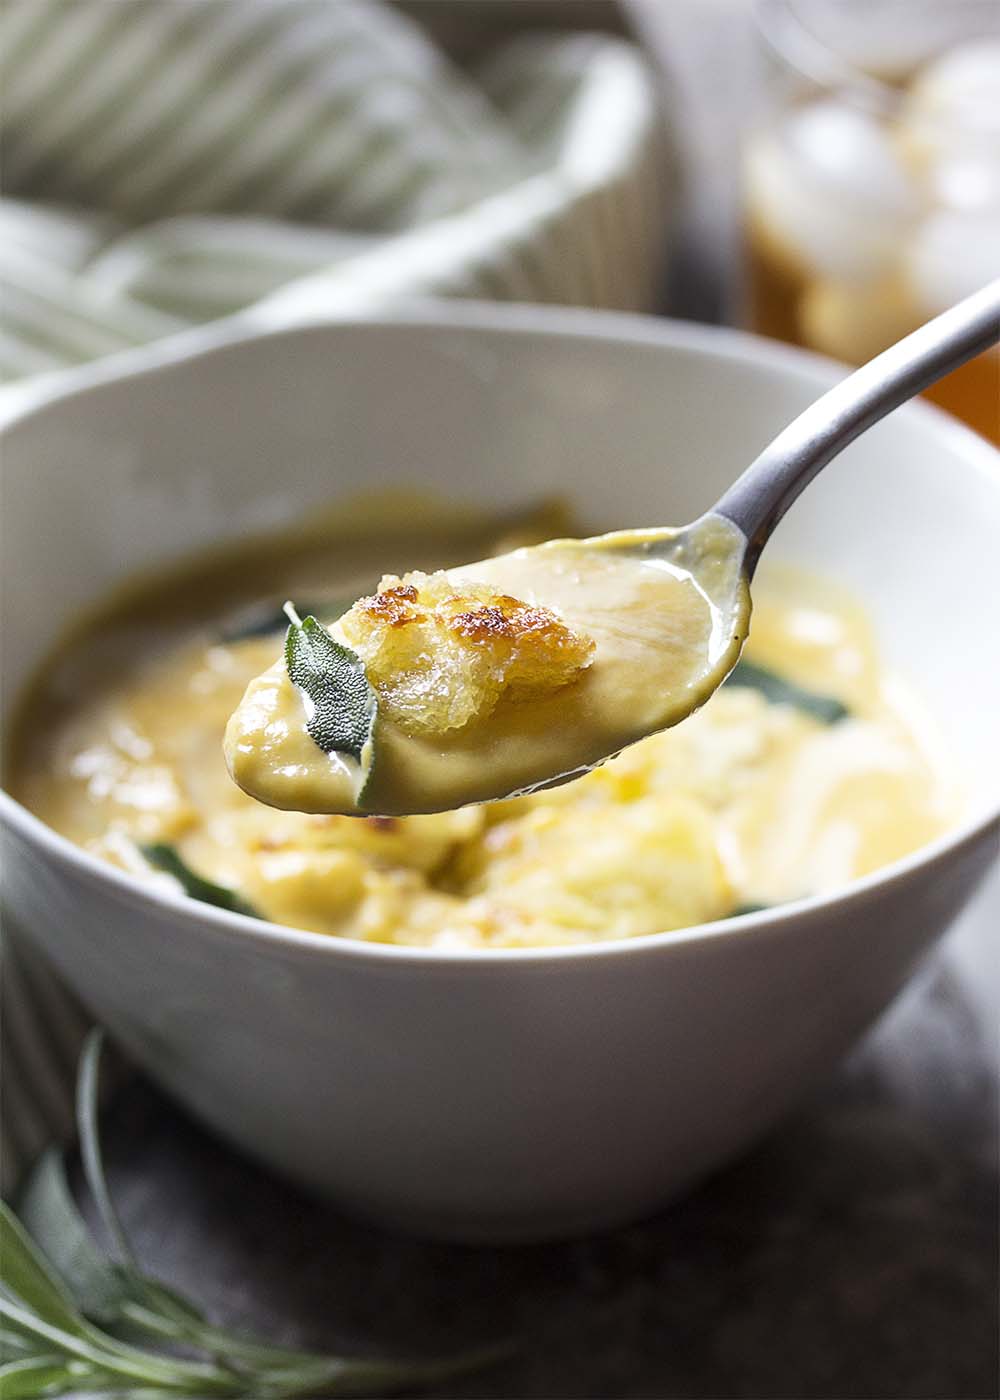 A spoon holding up some thick and creamy soup over the bowl. A crouton and a fried sage in the spoon as well.